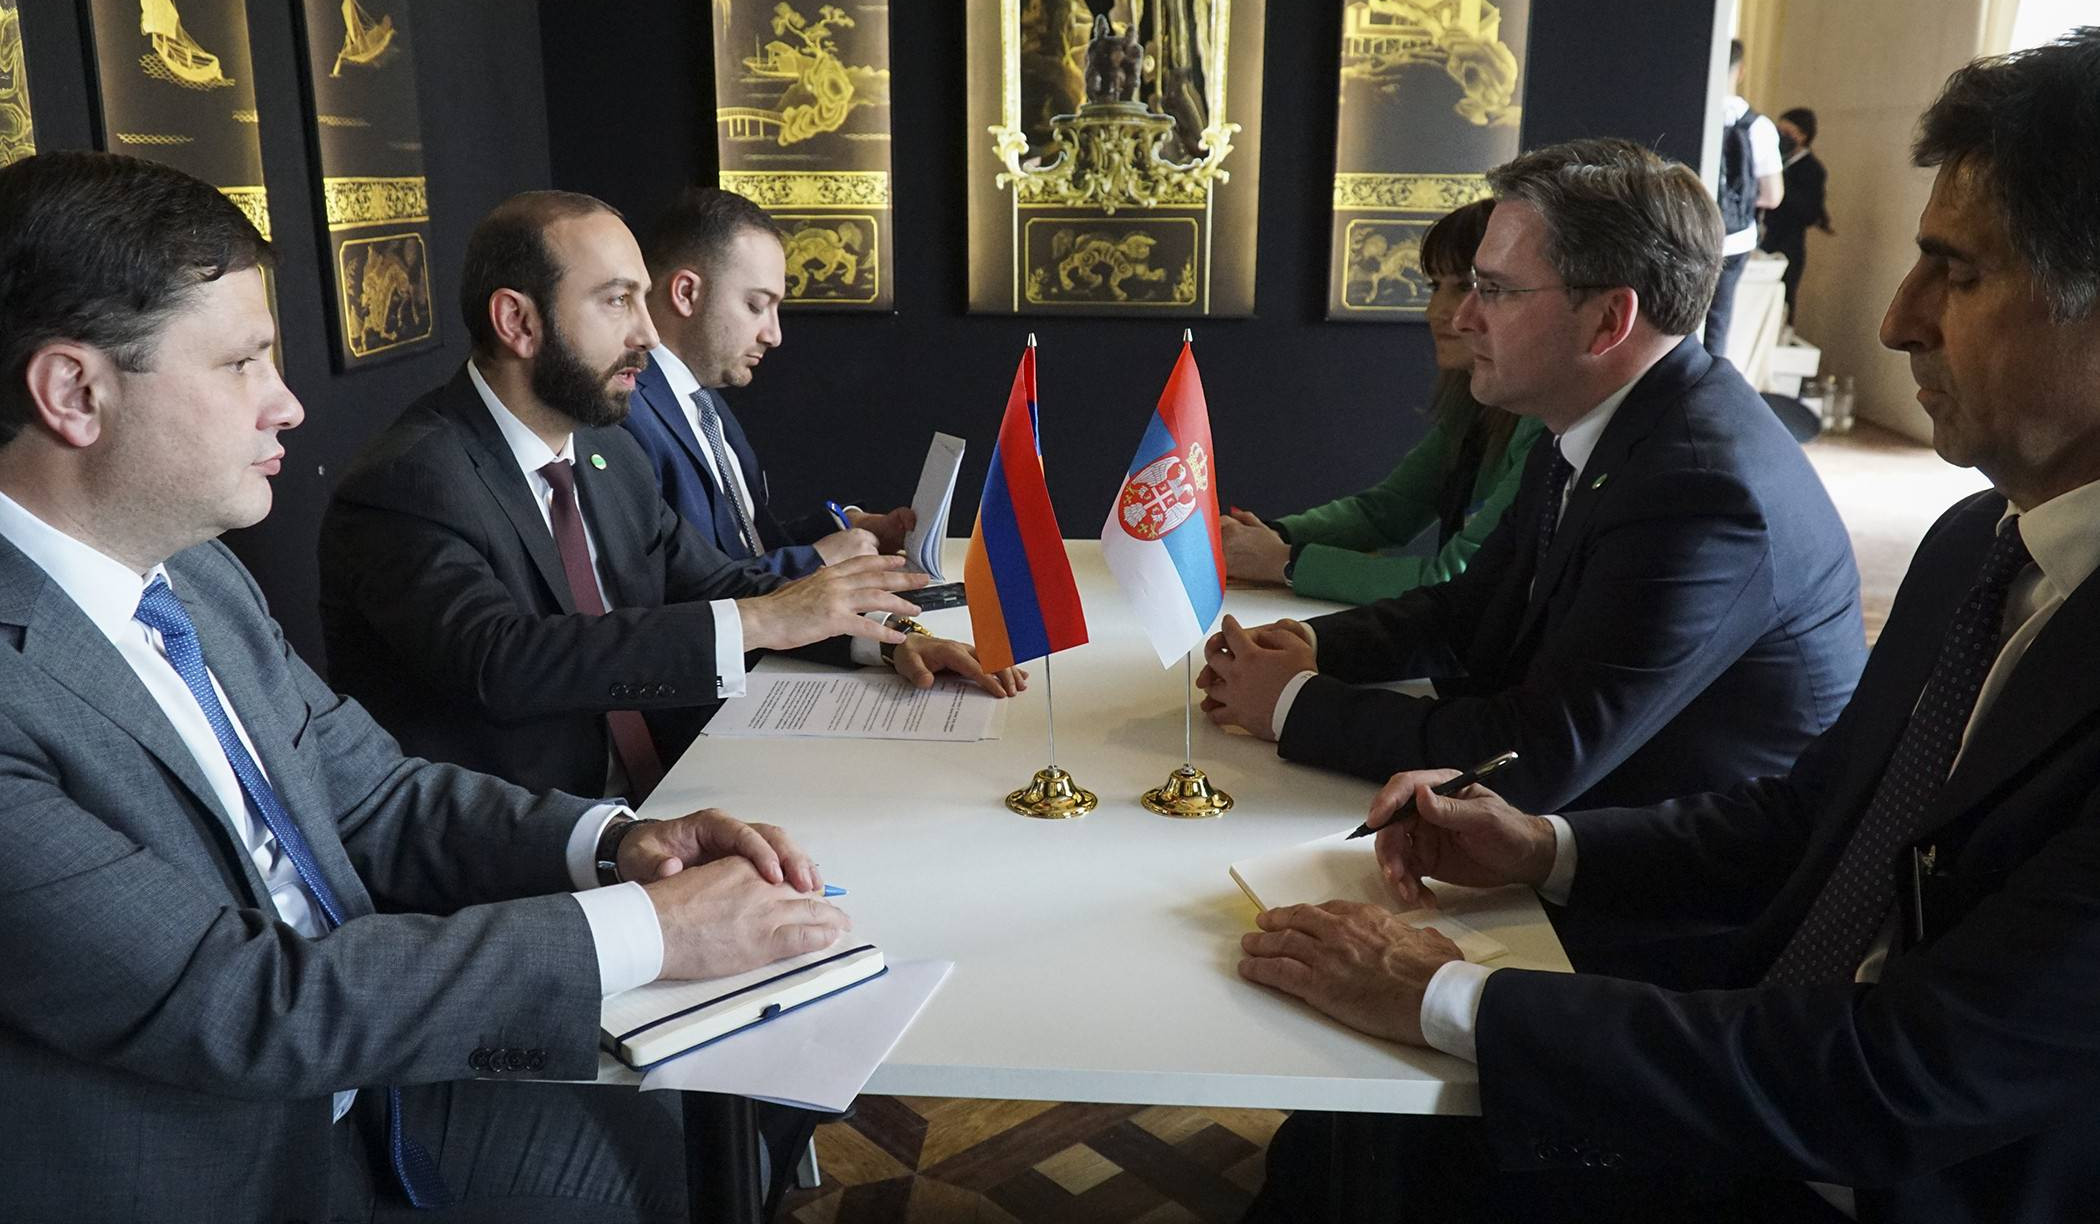 Armenia’s Foreign Minister presented details of Armenia-Turkey settlement process to his Serbian counterpart